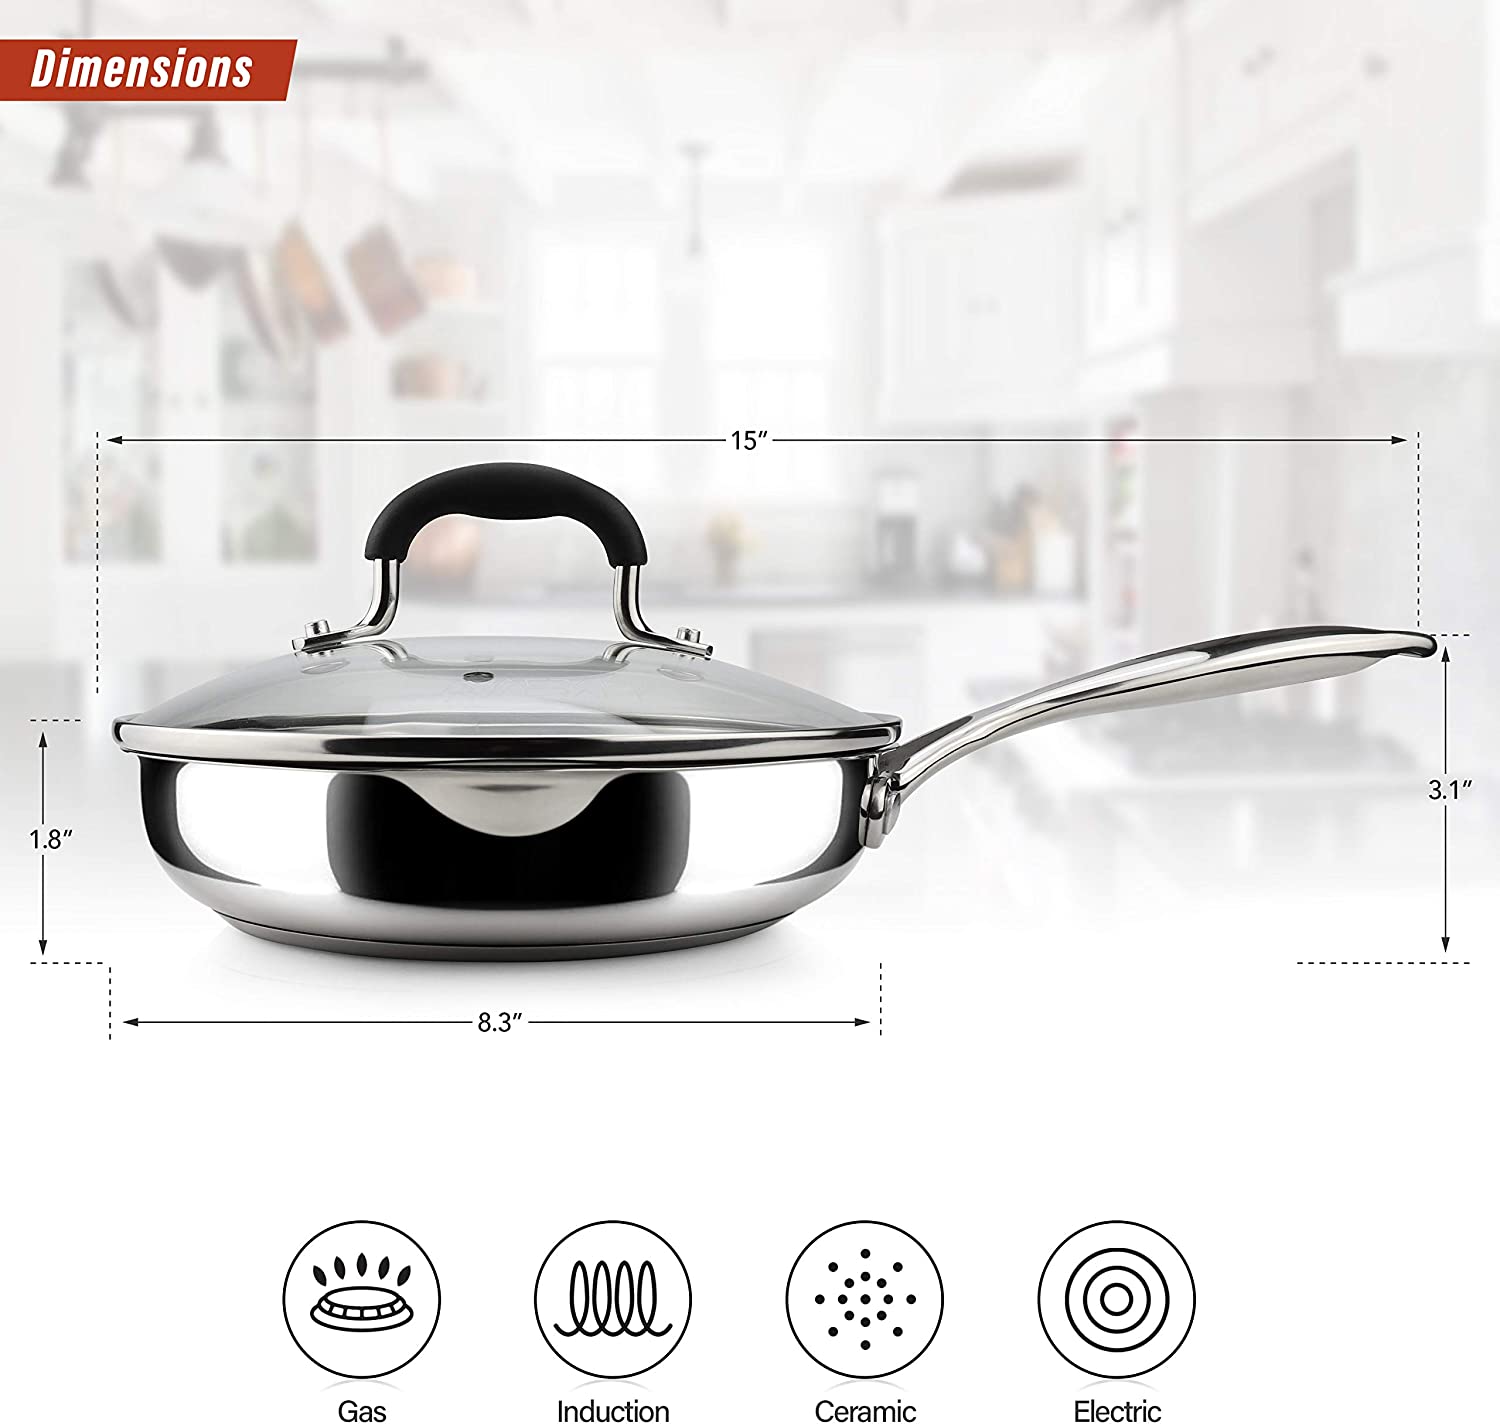 AVACRAFT 18/10 Stainless Steel Frying Pan with Lid and Side Spouts